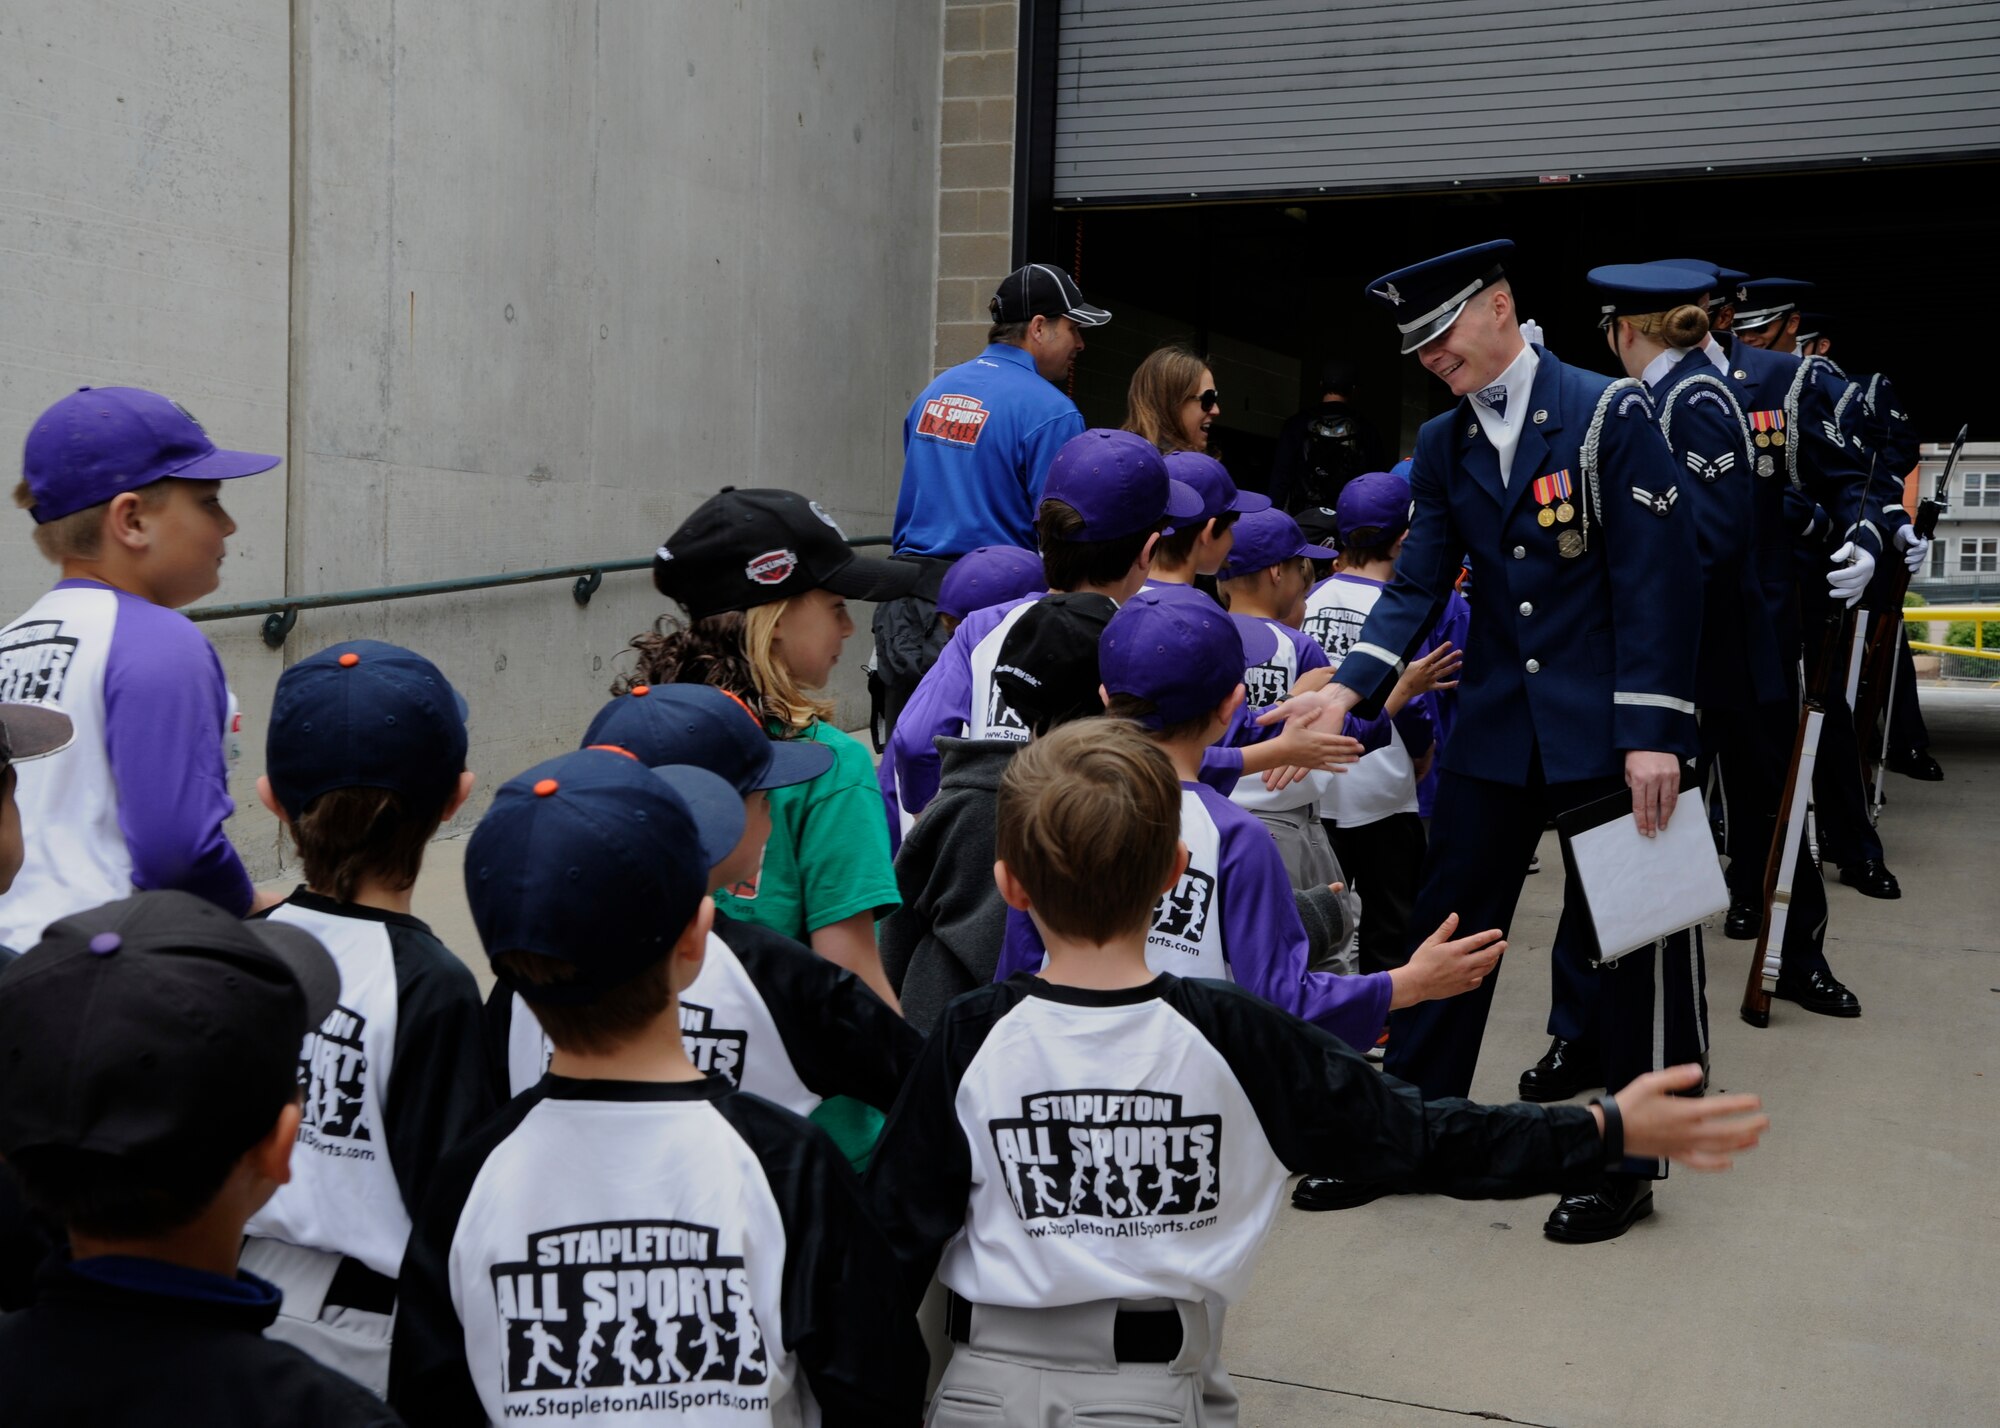 Members of the United States Air Force Honor Guard Drill Team high-five local community members at Coors Field in Denver, Colo., May 24, 2015. The Drill Team promotes the Air Force mission by showcasing drill performances at public and military venues to recruit, retain and inspire Airmen. (U.S. Air Force photo by Senior Airman Preston Webb/RELEASED)